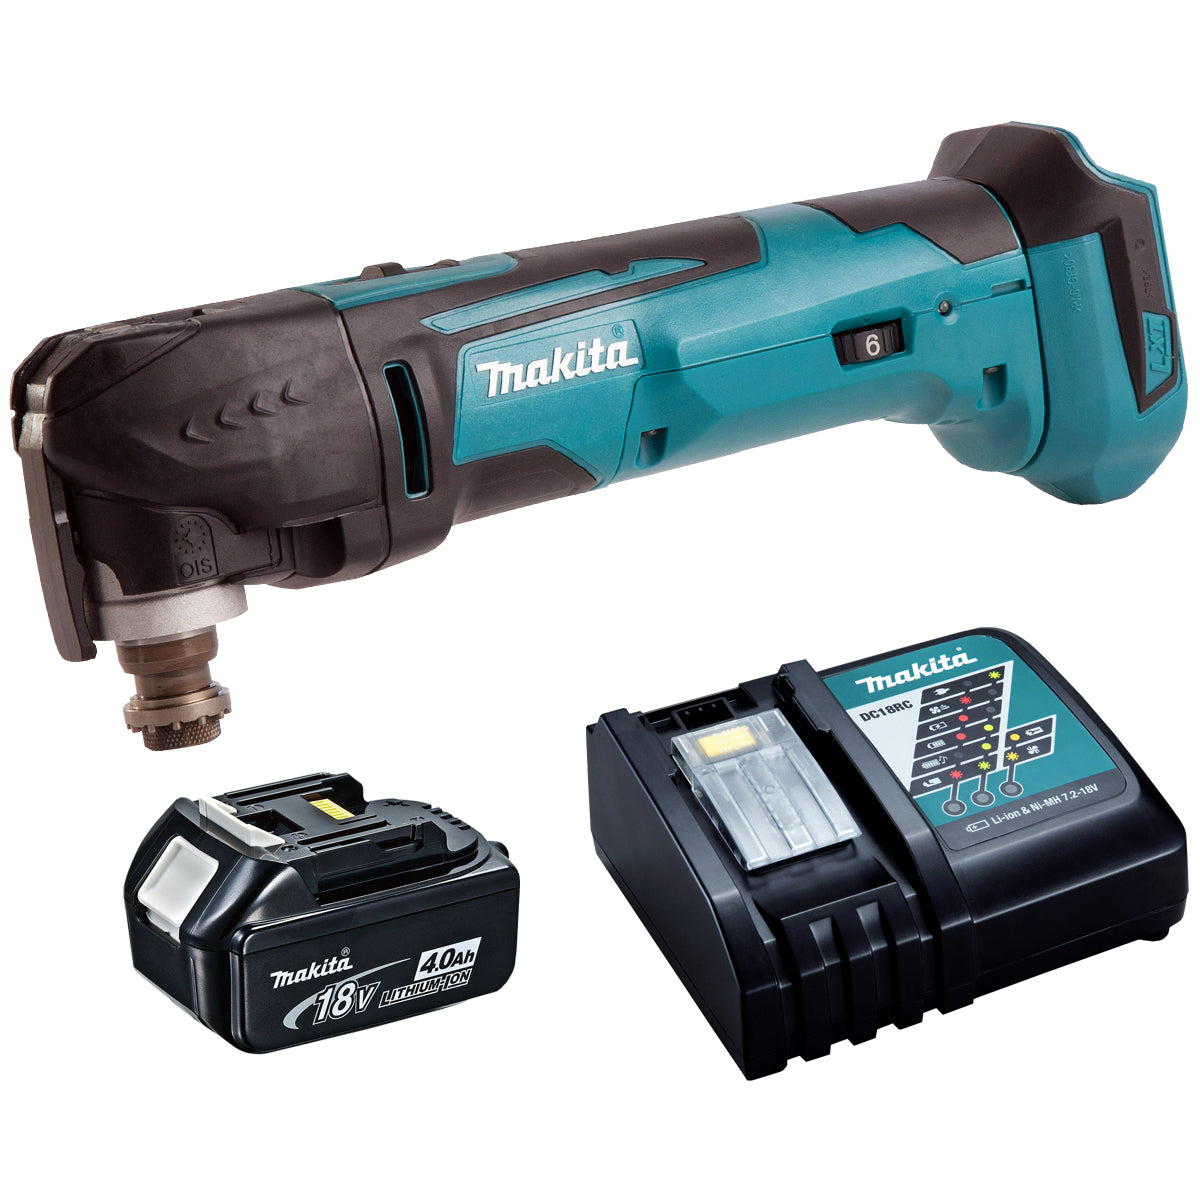 Makita DTM51Z 18V Oscillating Multi Tool Cutter with 1 x 4.0Ah Battery & Charger